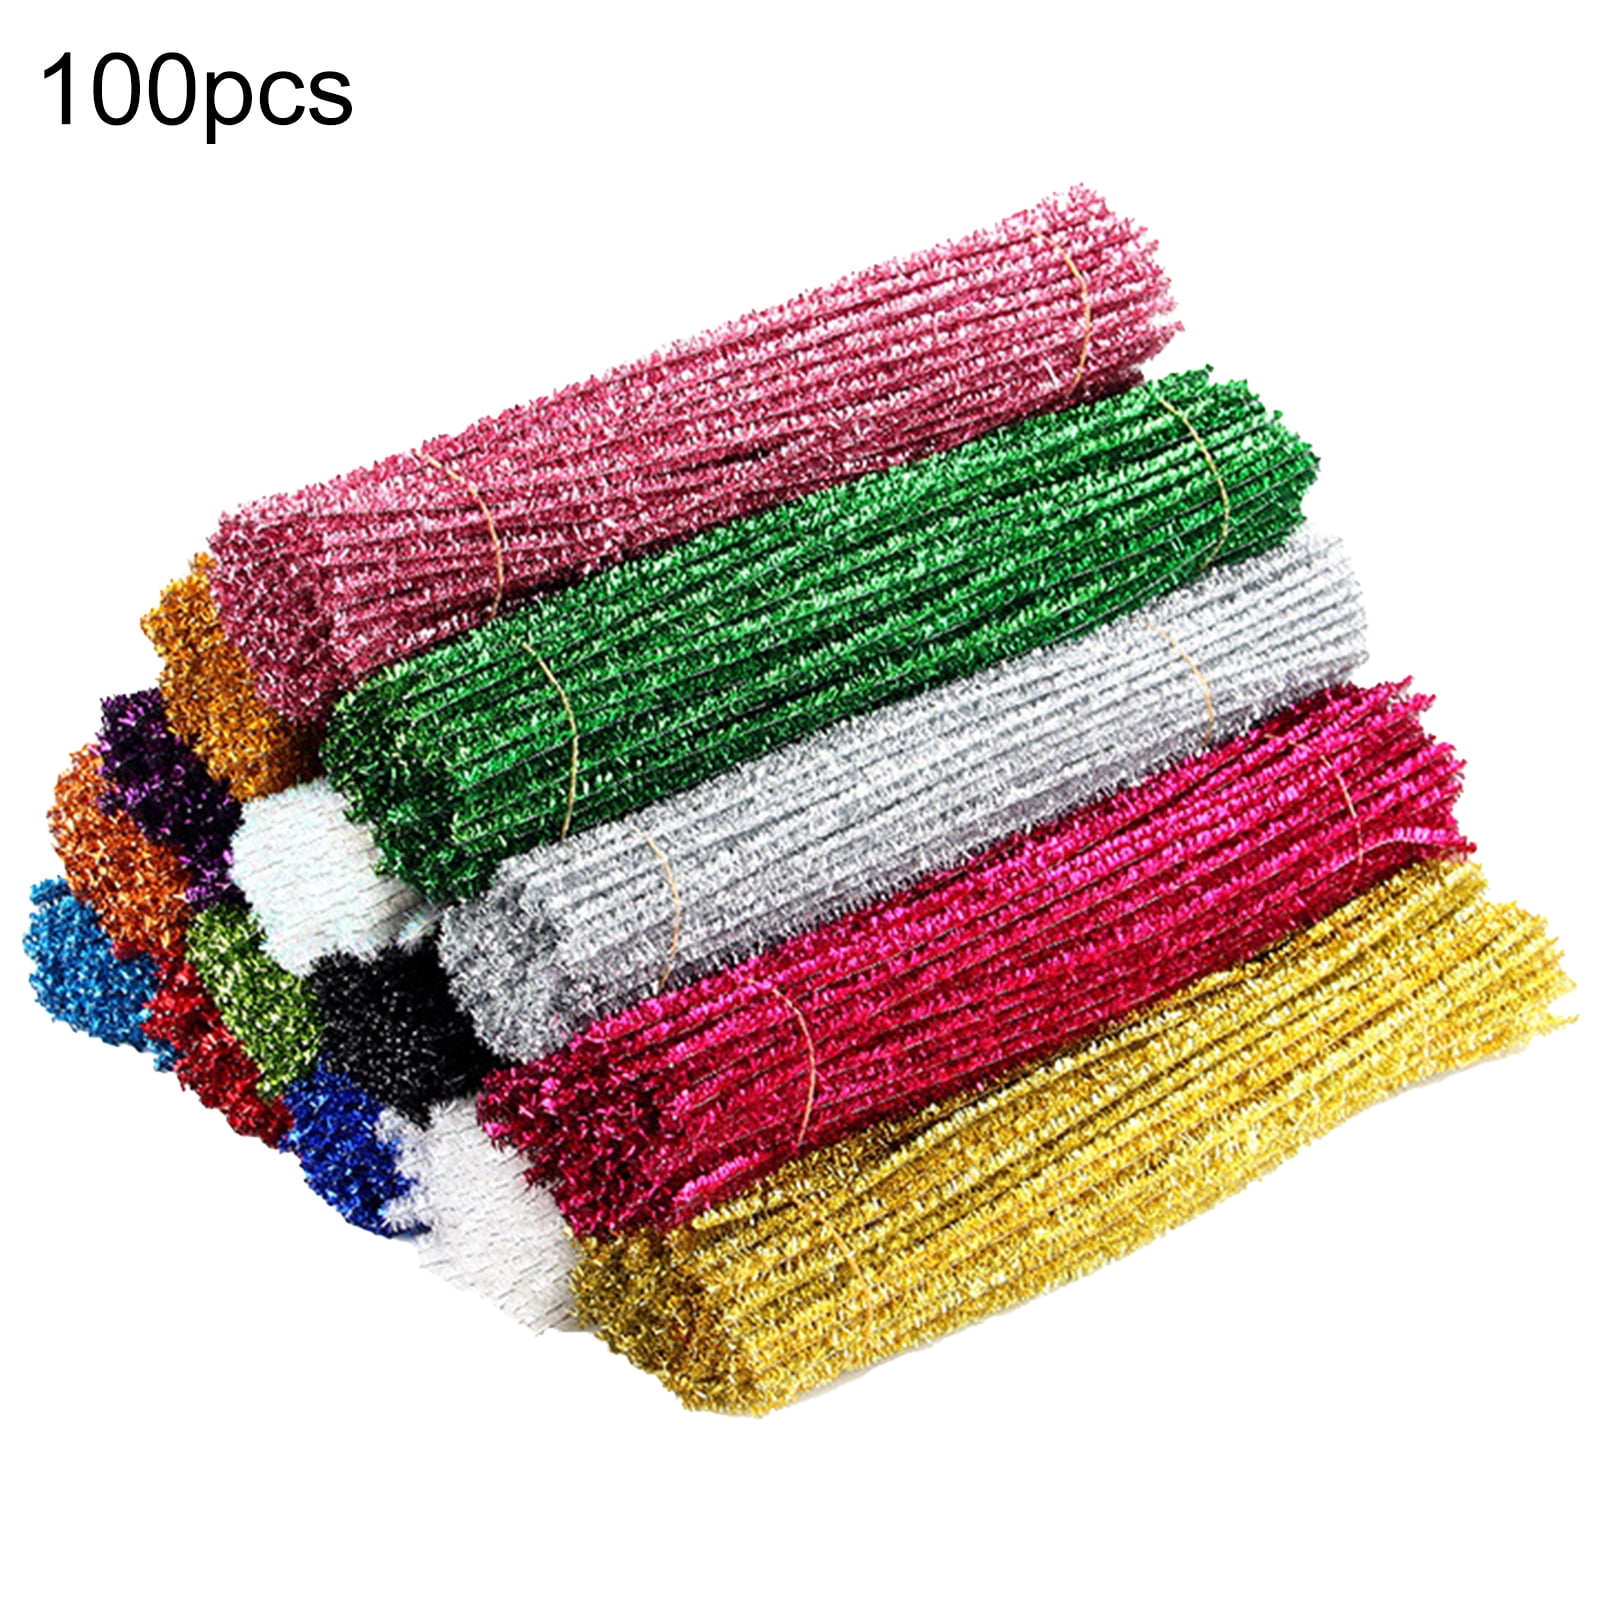 10-5,000 x LIGHT BEIGE chenille craft stems pipe cleaners 30cm x 6mm wide 